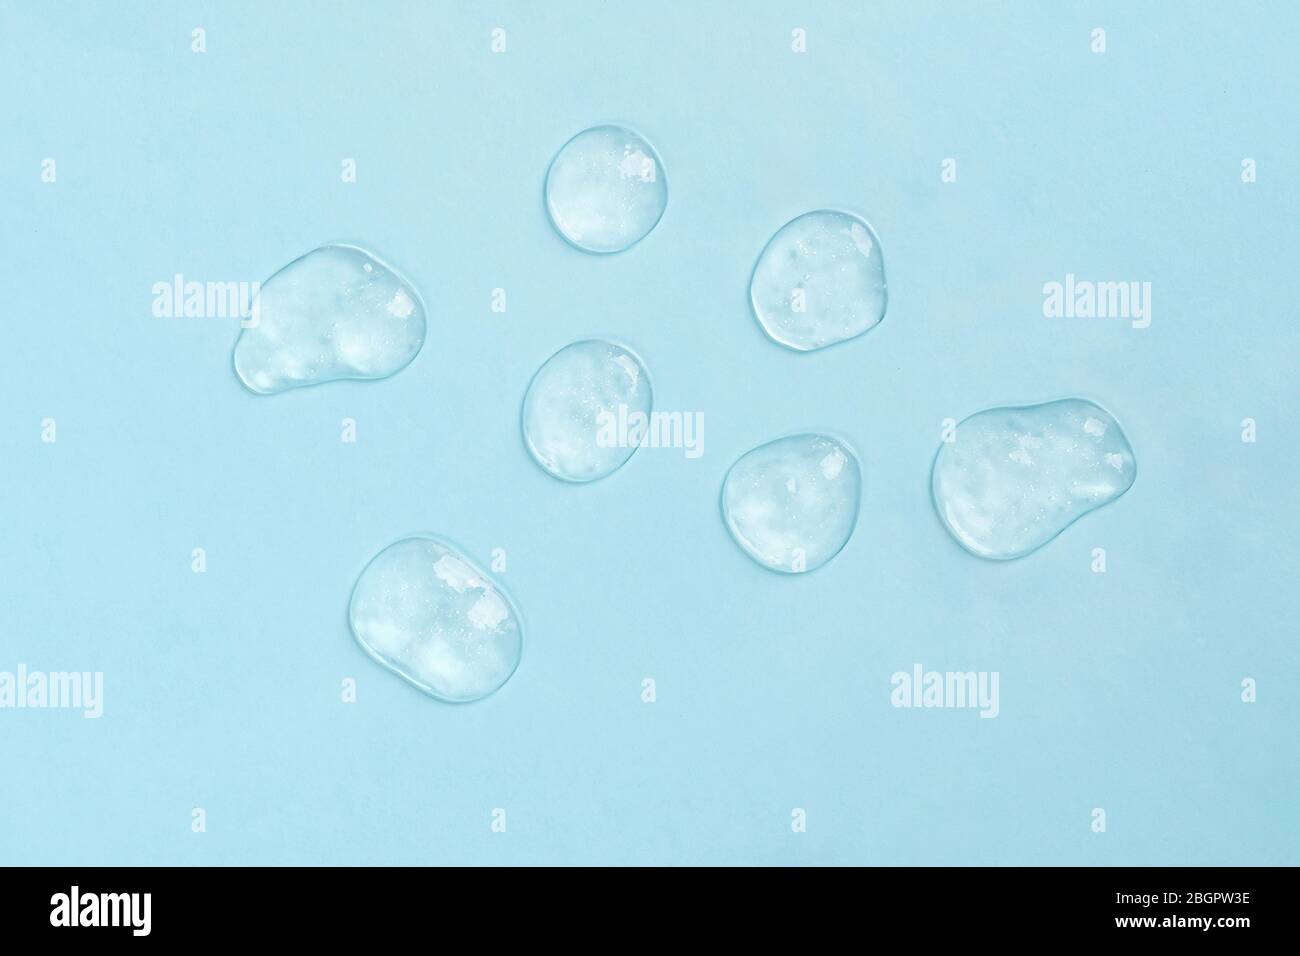 Squeezed cosmetic clear cream gel texture. Close up photo of transparent drop of skin care product. High Quality transparent gel with bubbles closeup on blue background. Stock Photo